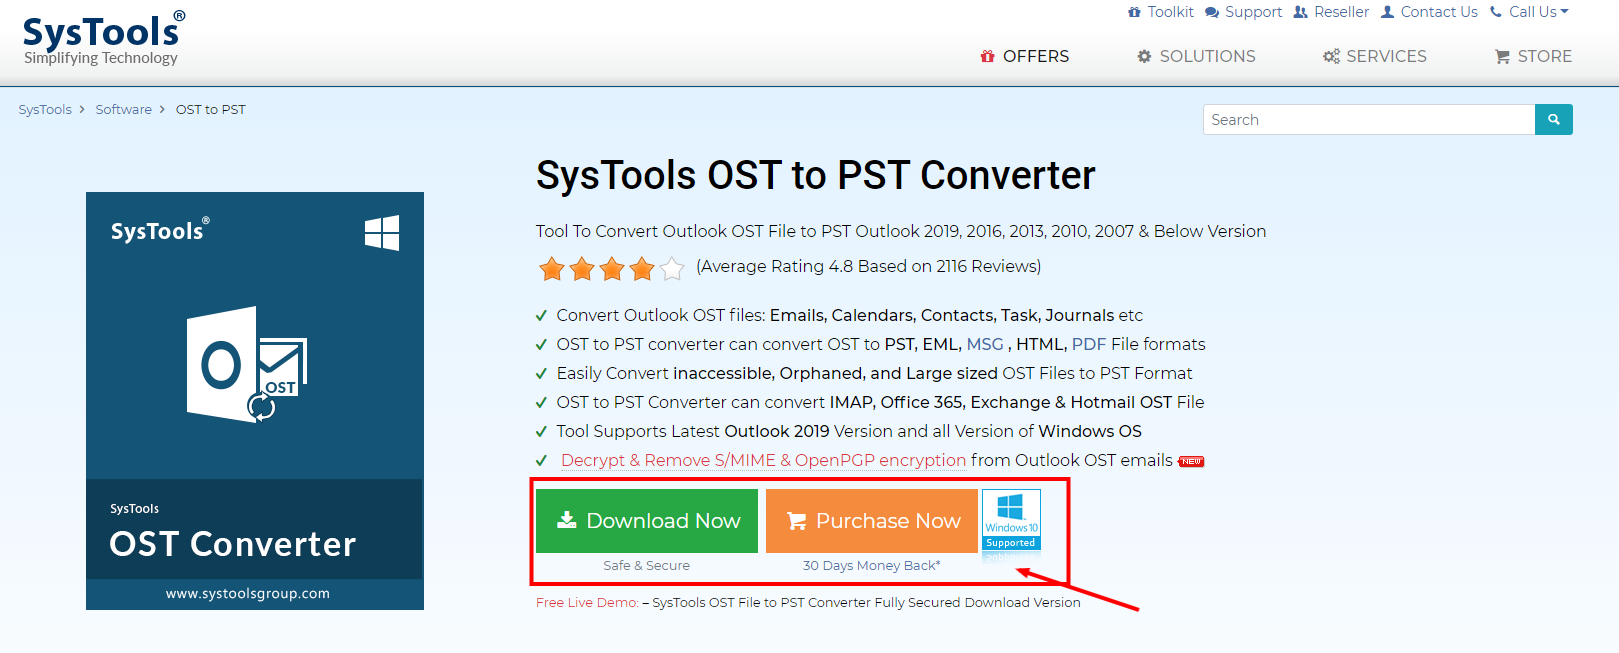 SysTools OST Converter Reviews - OST Converter